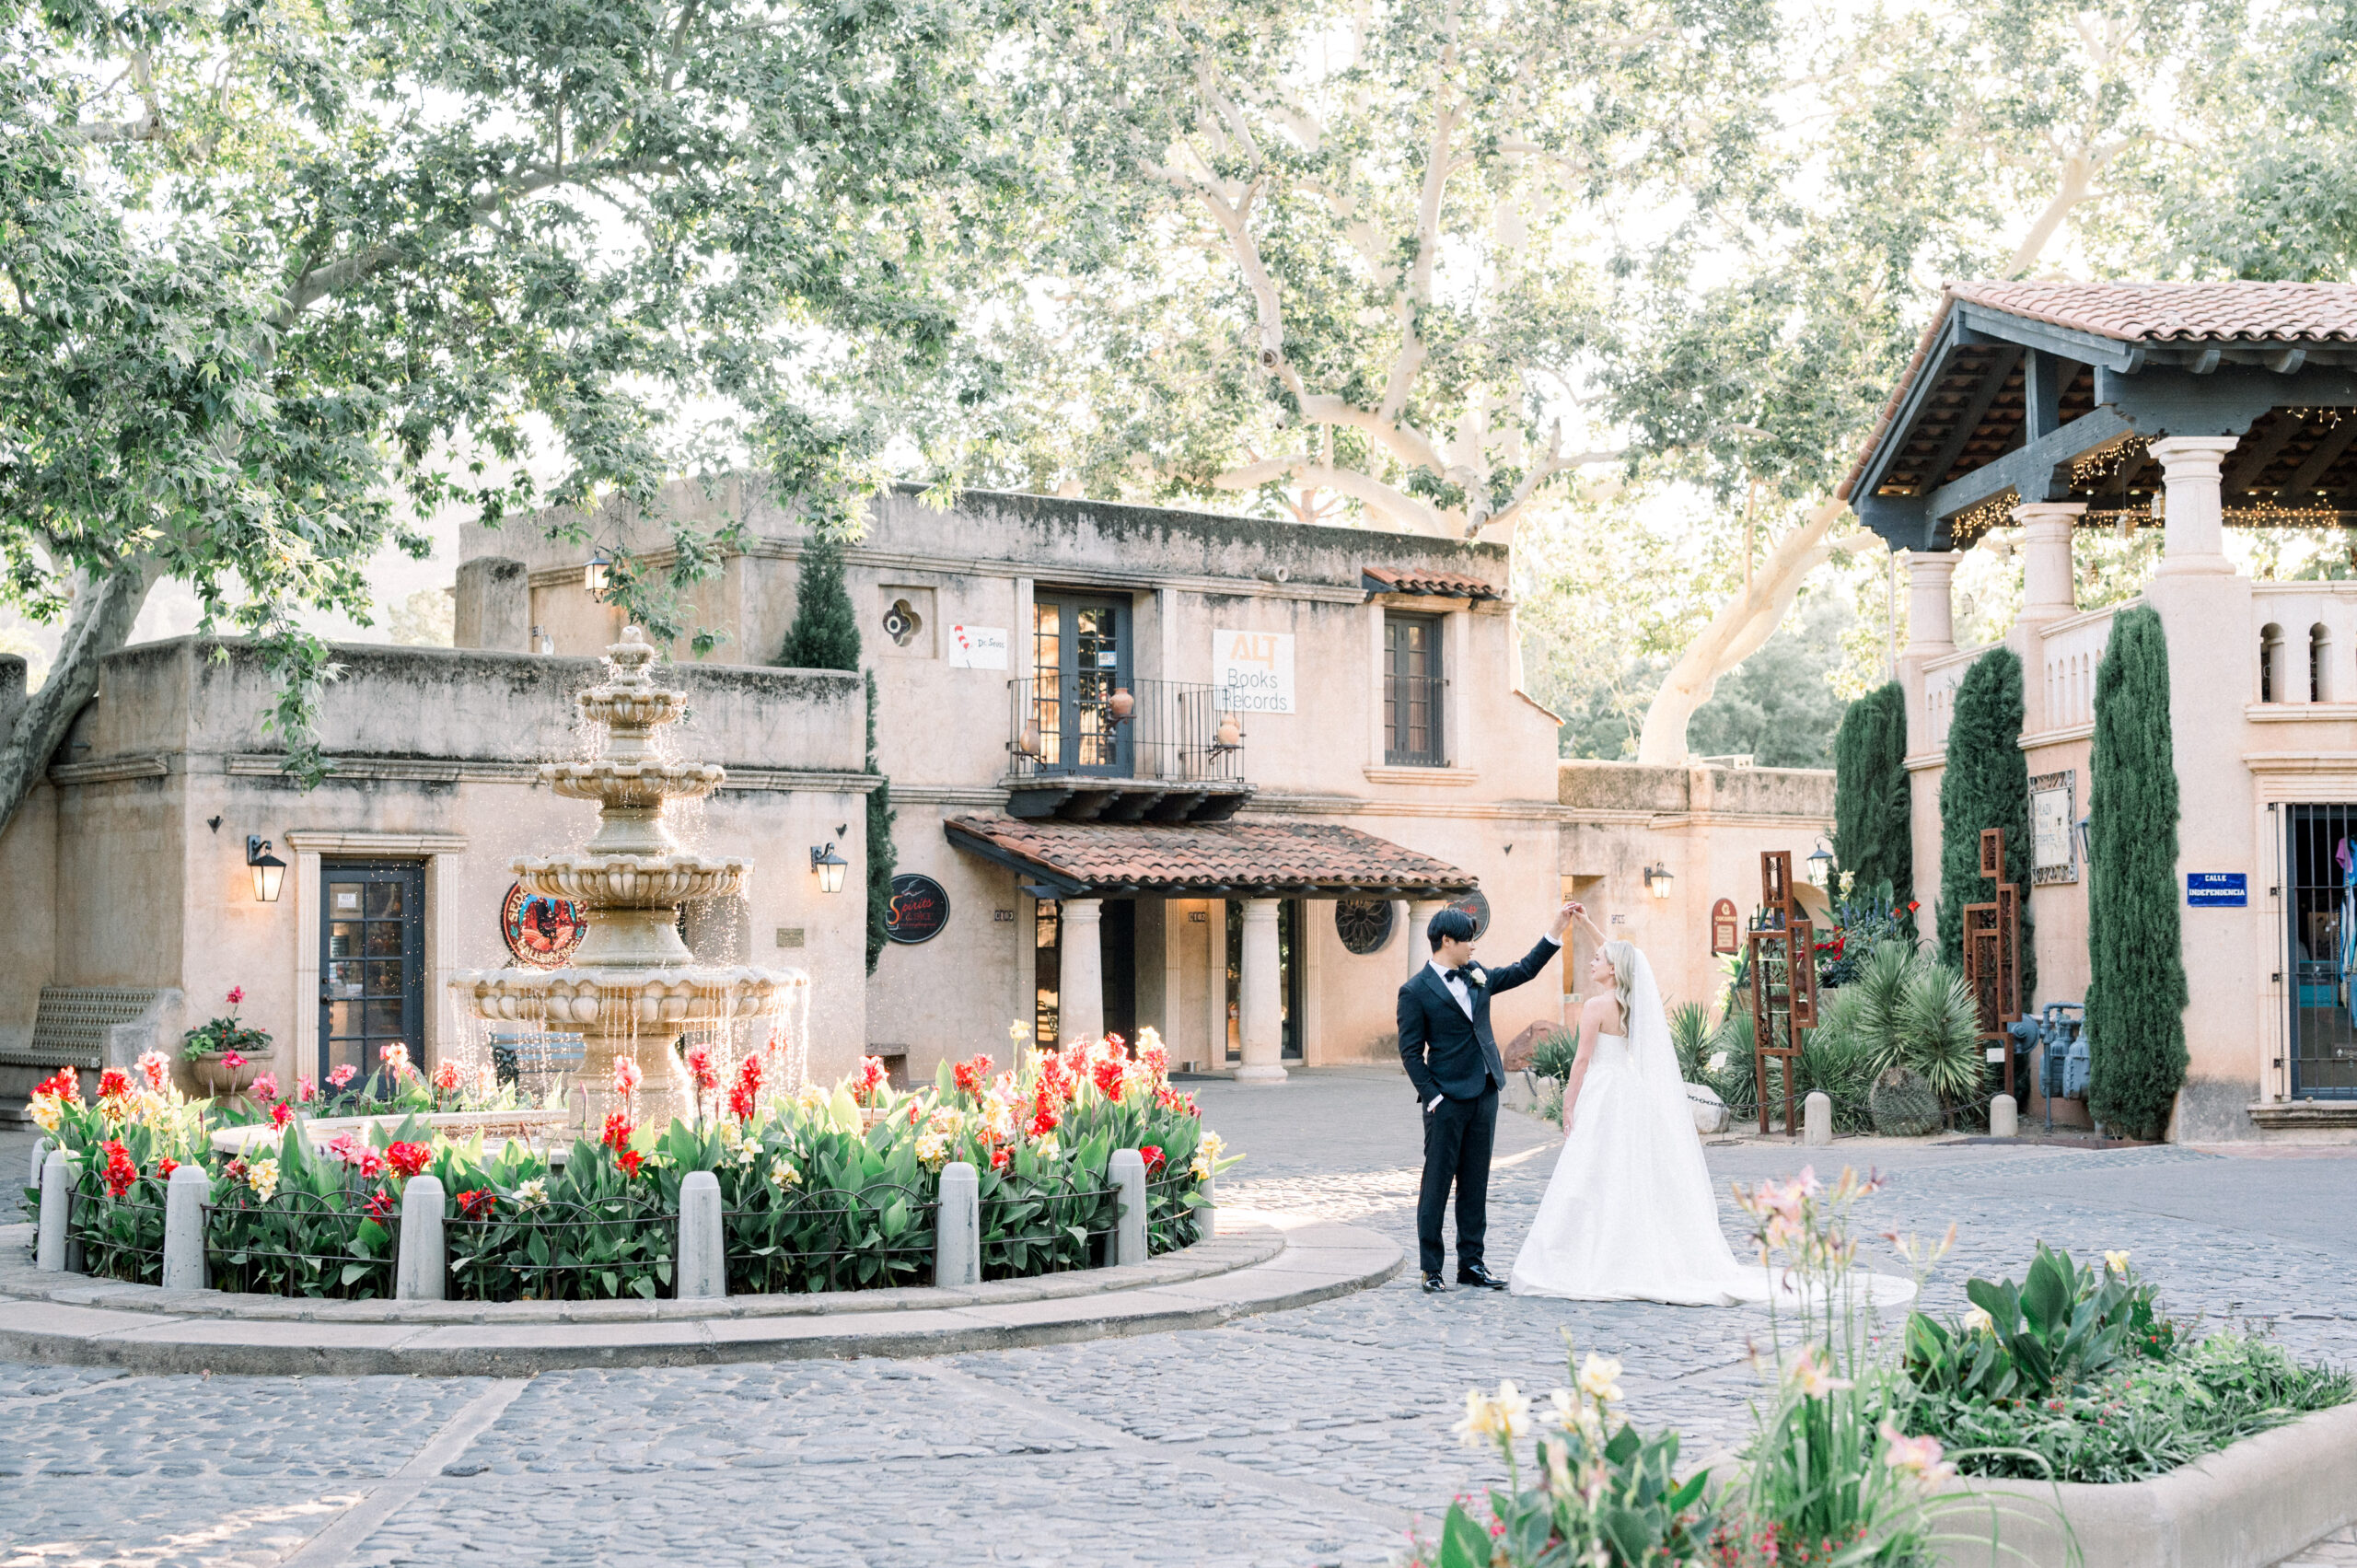 Jonas and Morgan wanted a simple yet elegant black tie intimate Sedona wedding and they got justt that at the stunning Tlaquepaque in Sedona, Arizona.